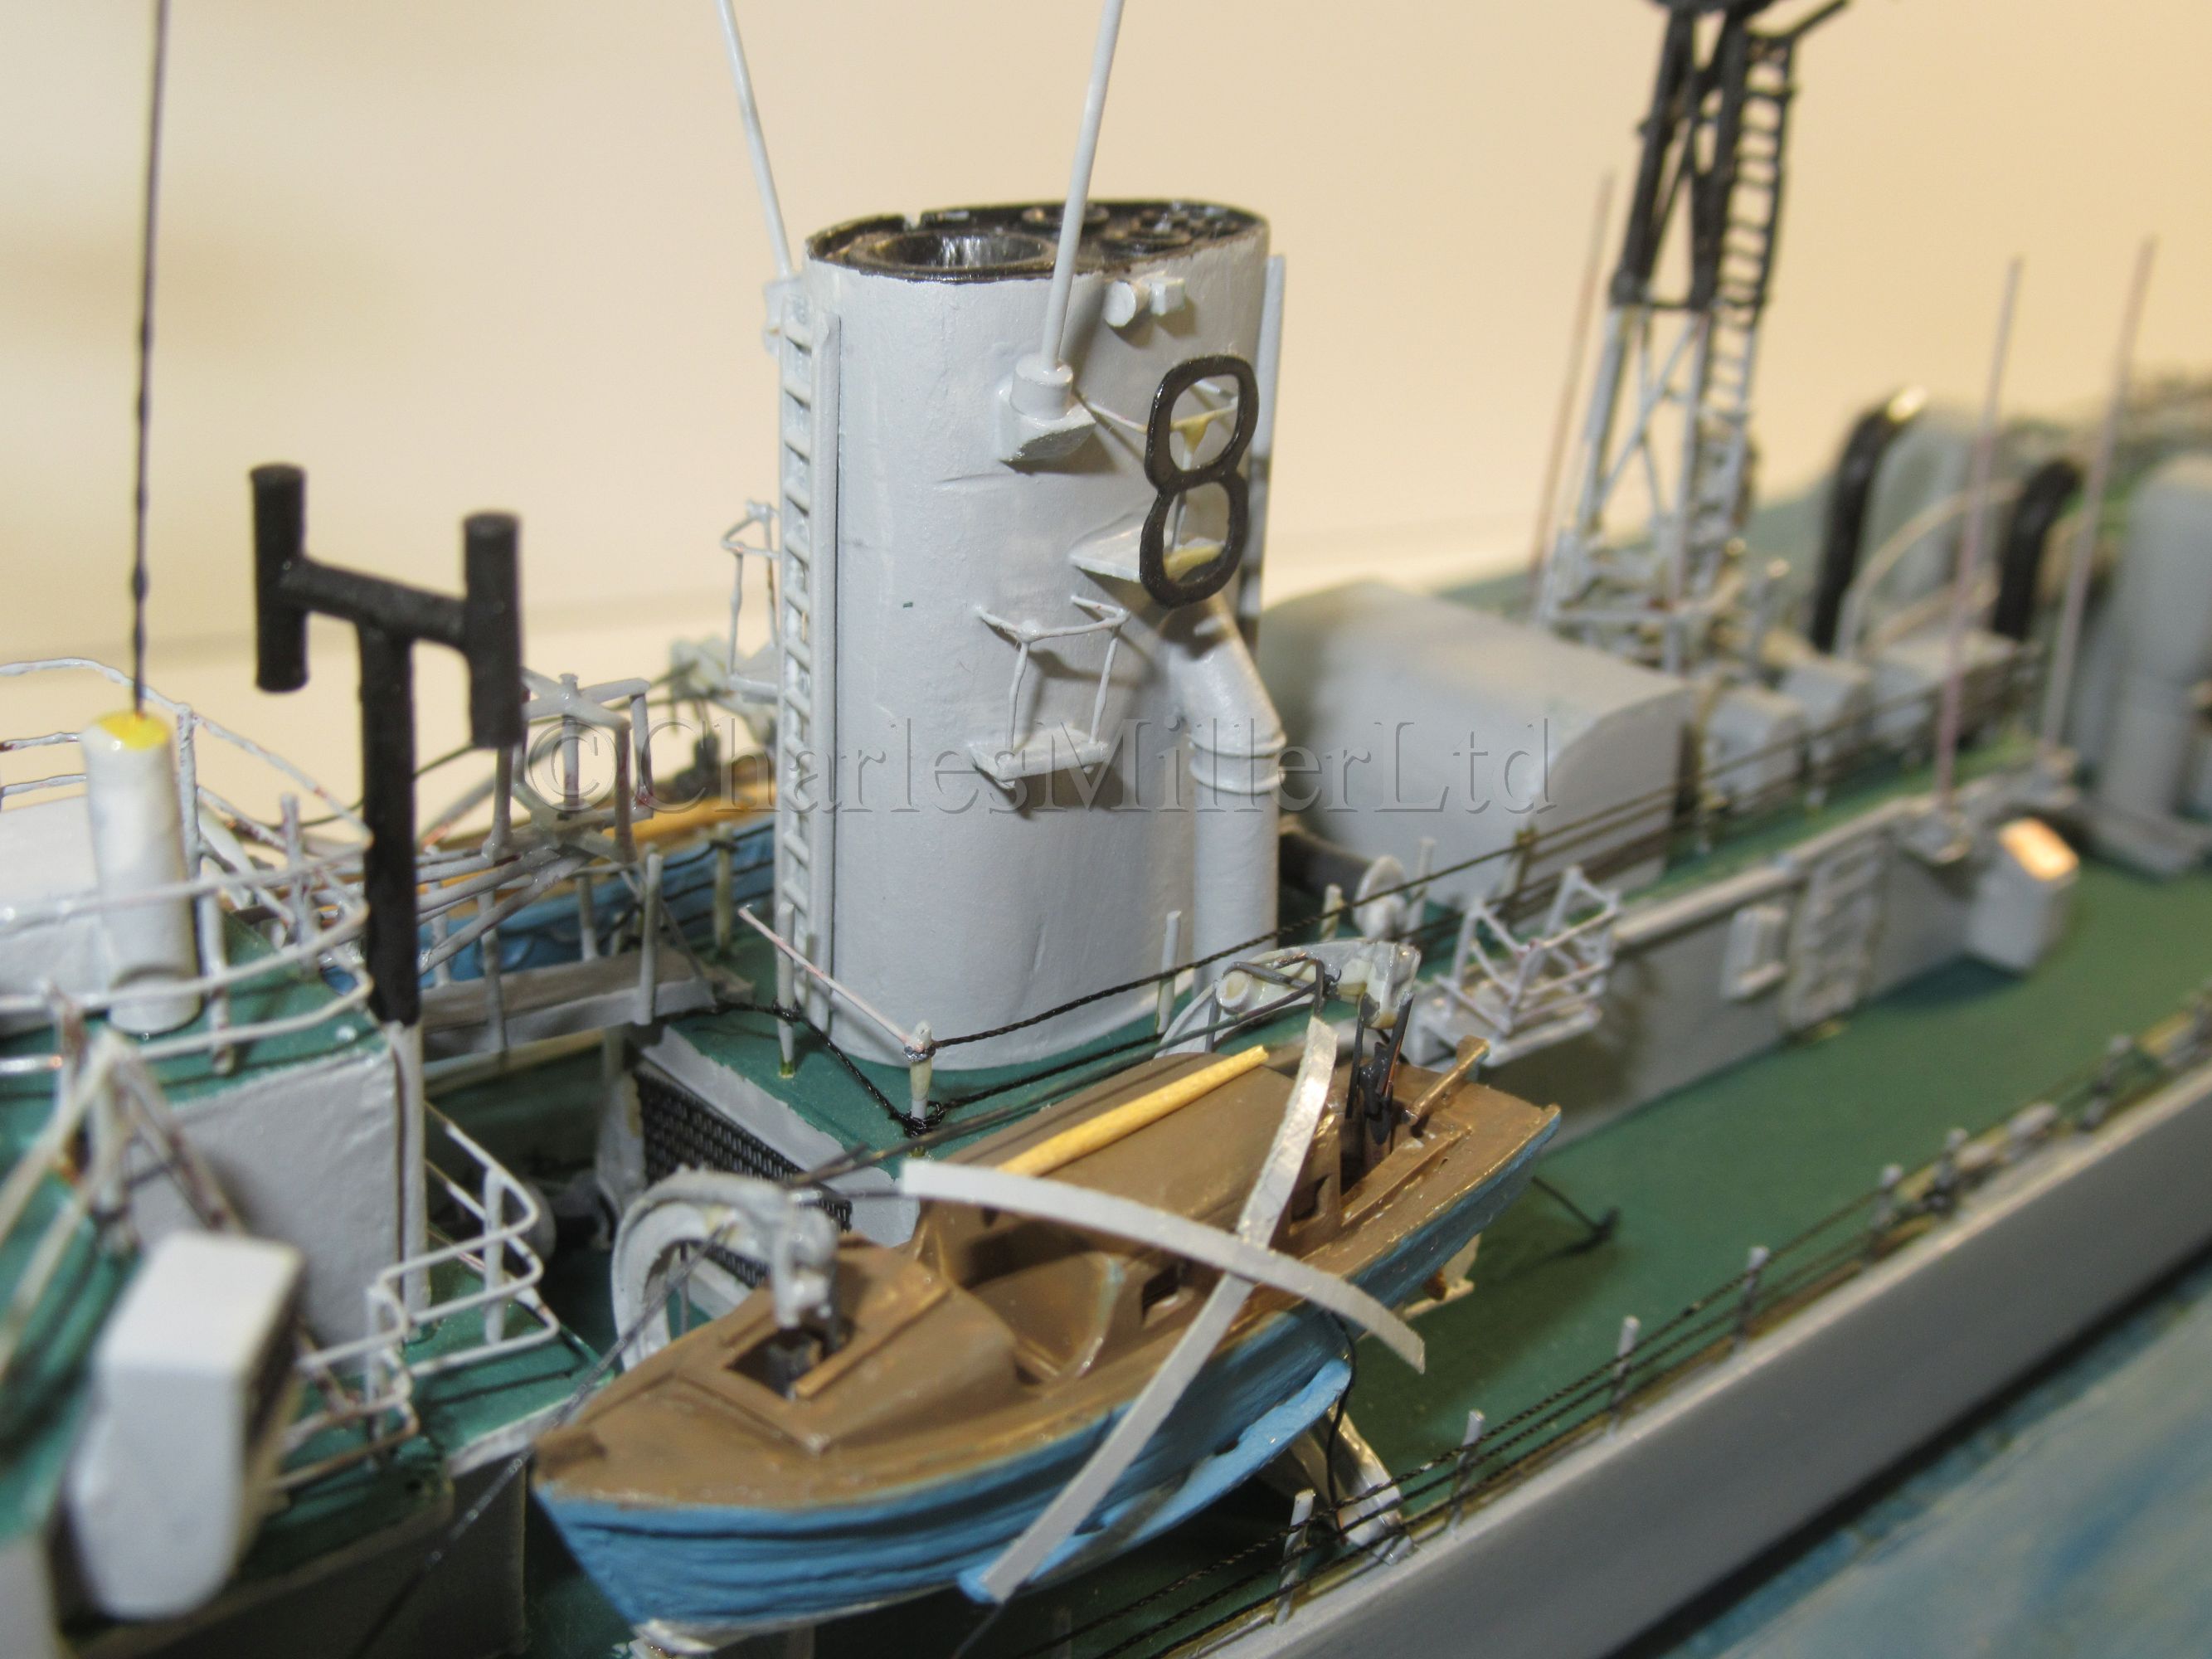 A 1:192 WATERLINE MODEL FOR THE TYPE 14 BLACKWOOD CLASS FRIGATE HMS GRAFTON (F51), AS FITTED IN - Image 10 of 14